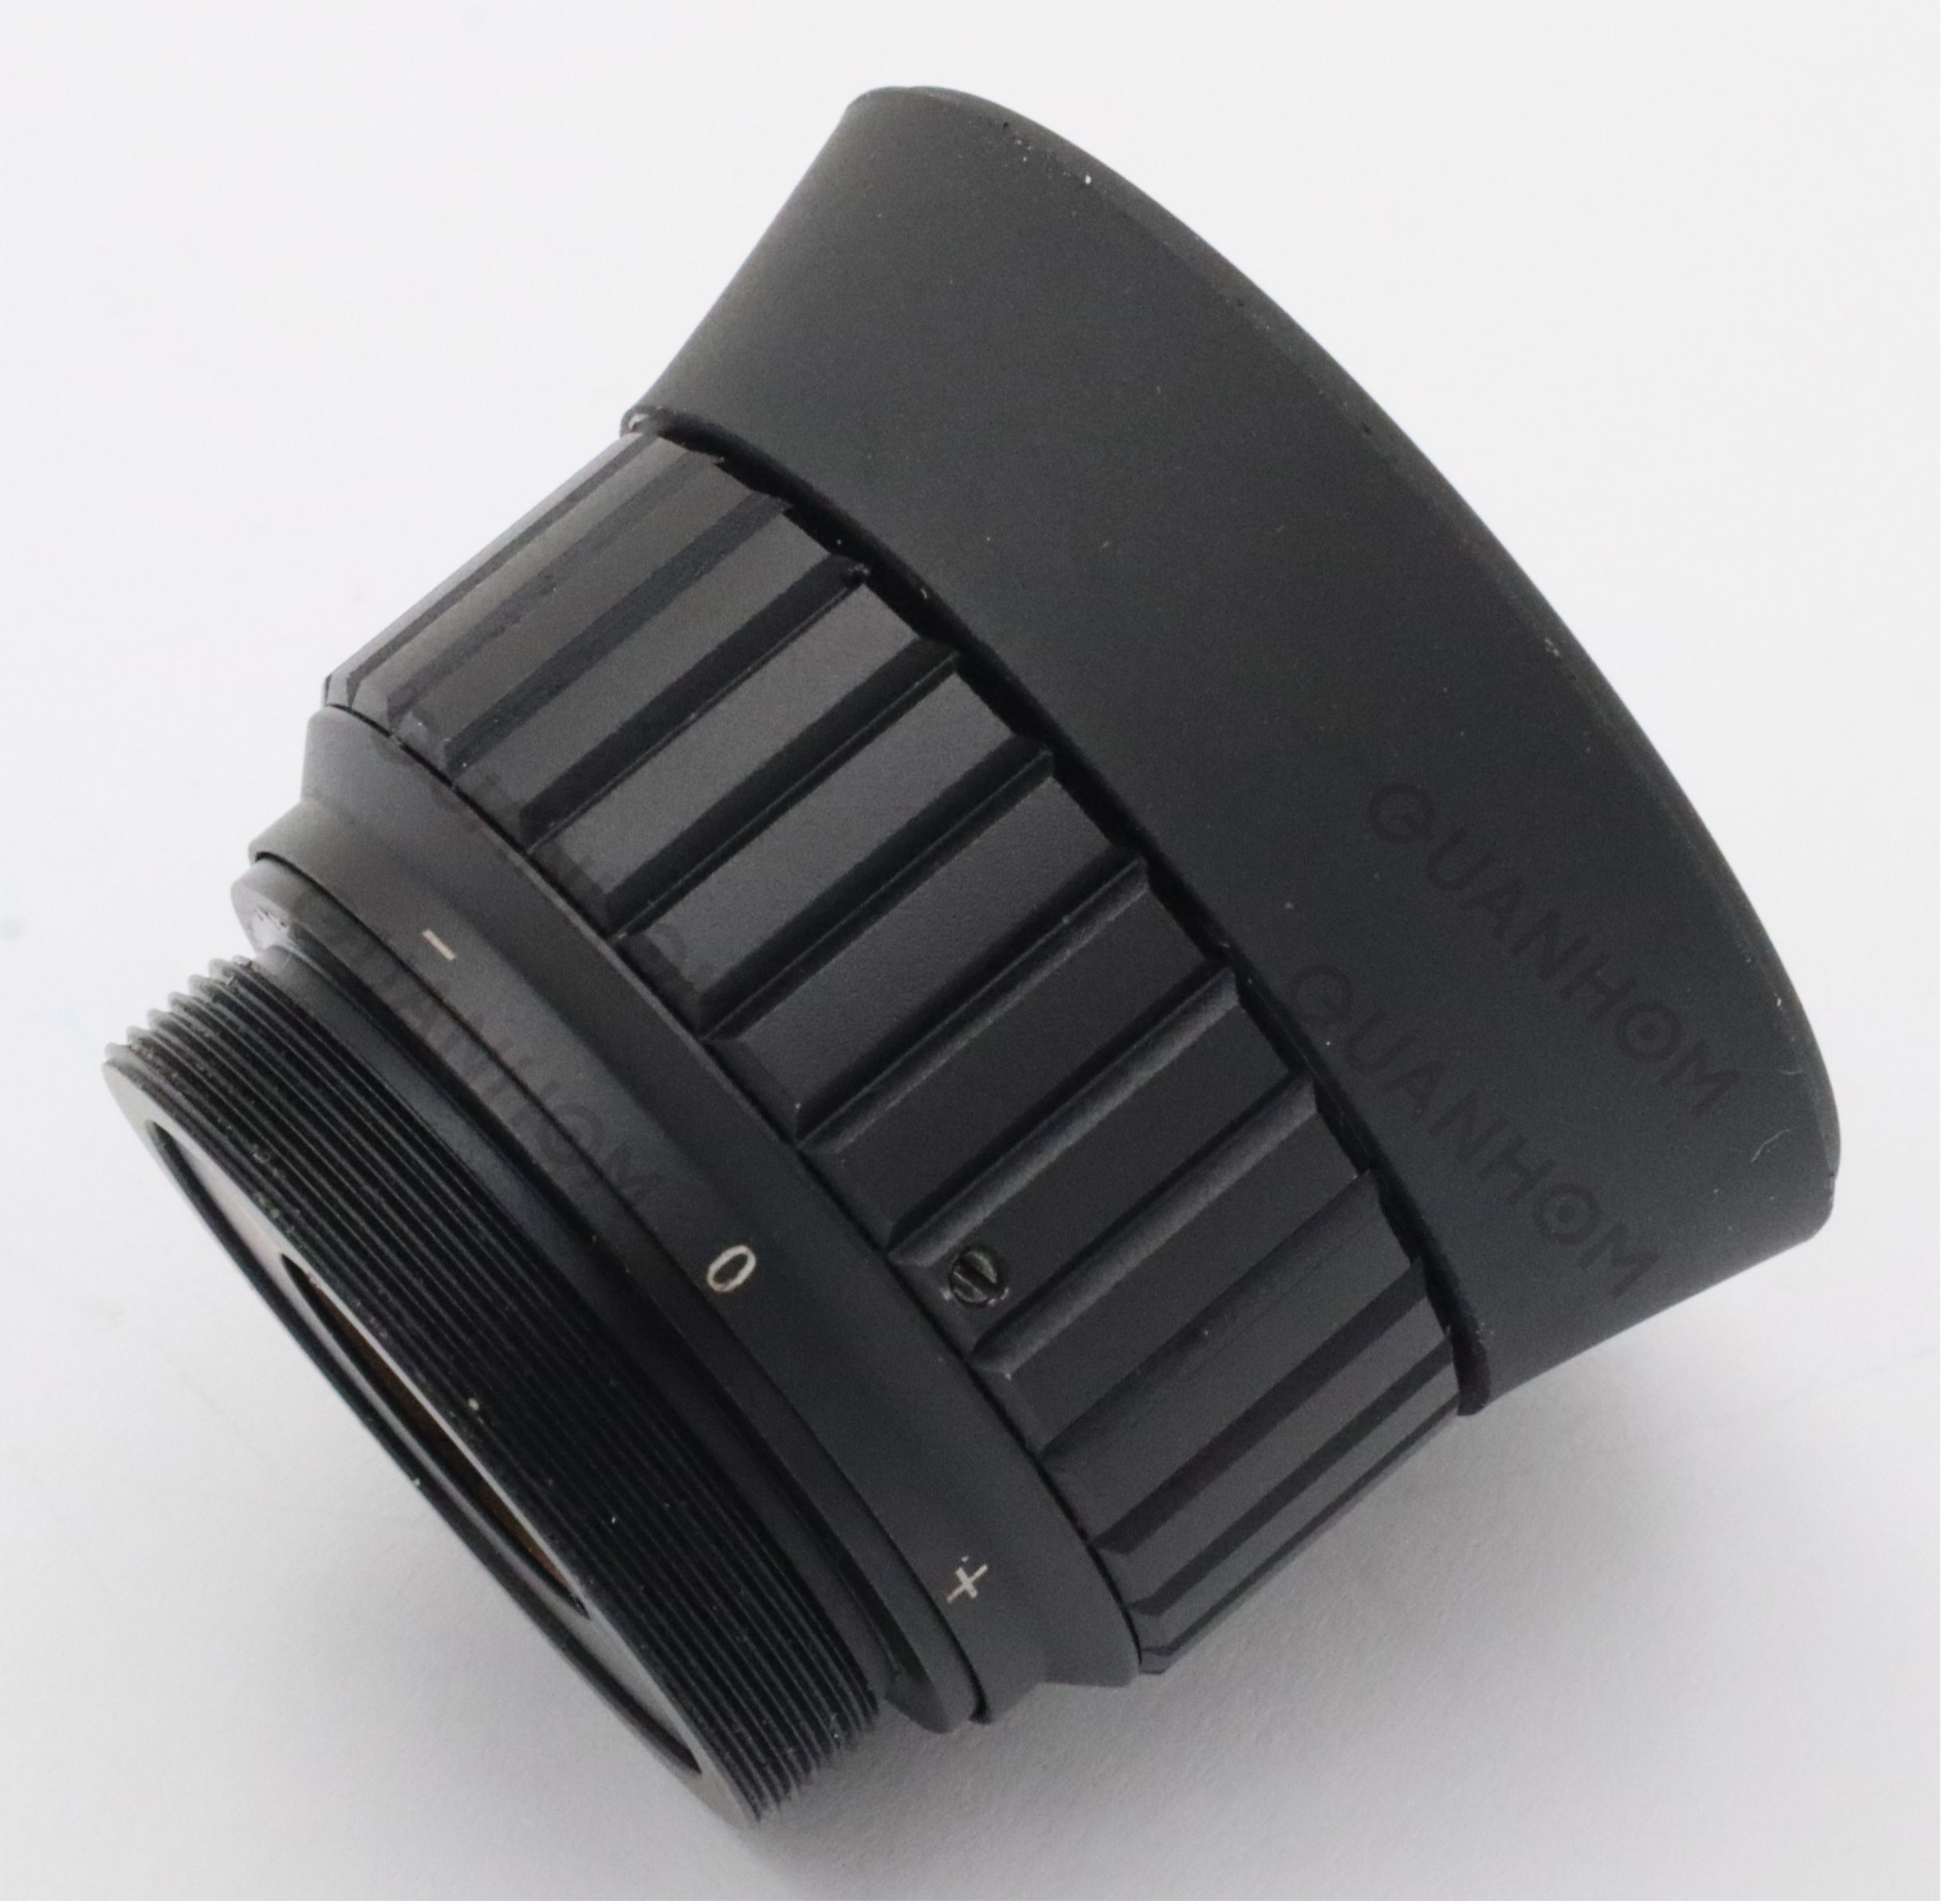 Can Quanhom adjust certain details of the eyepiece according to different needs of customers?